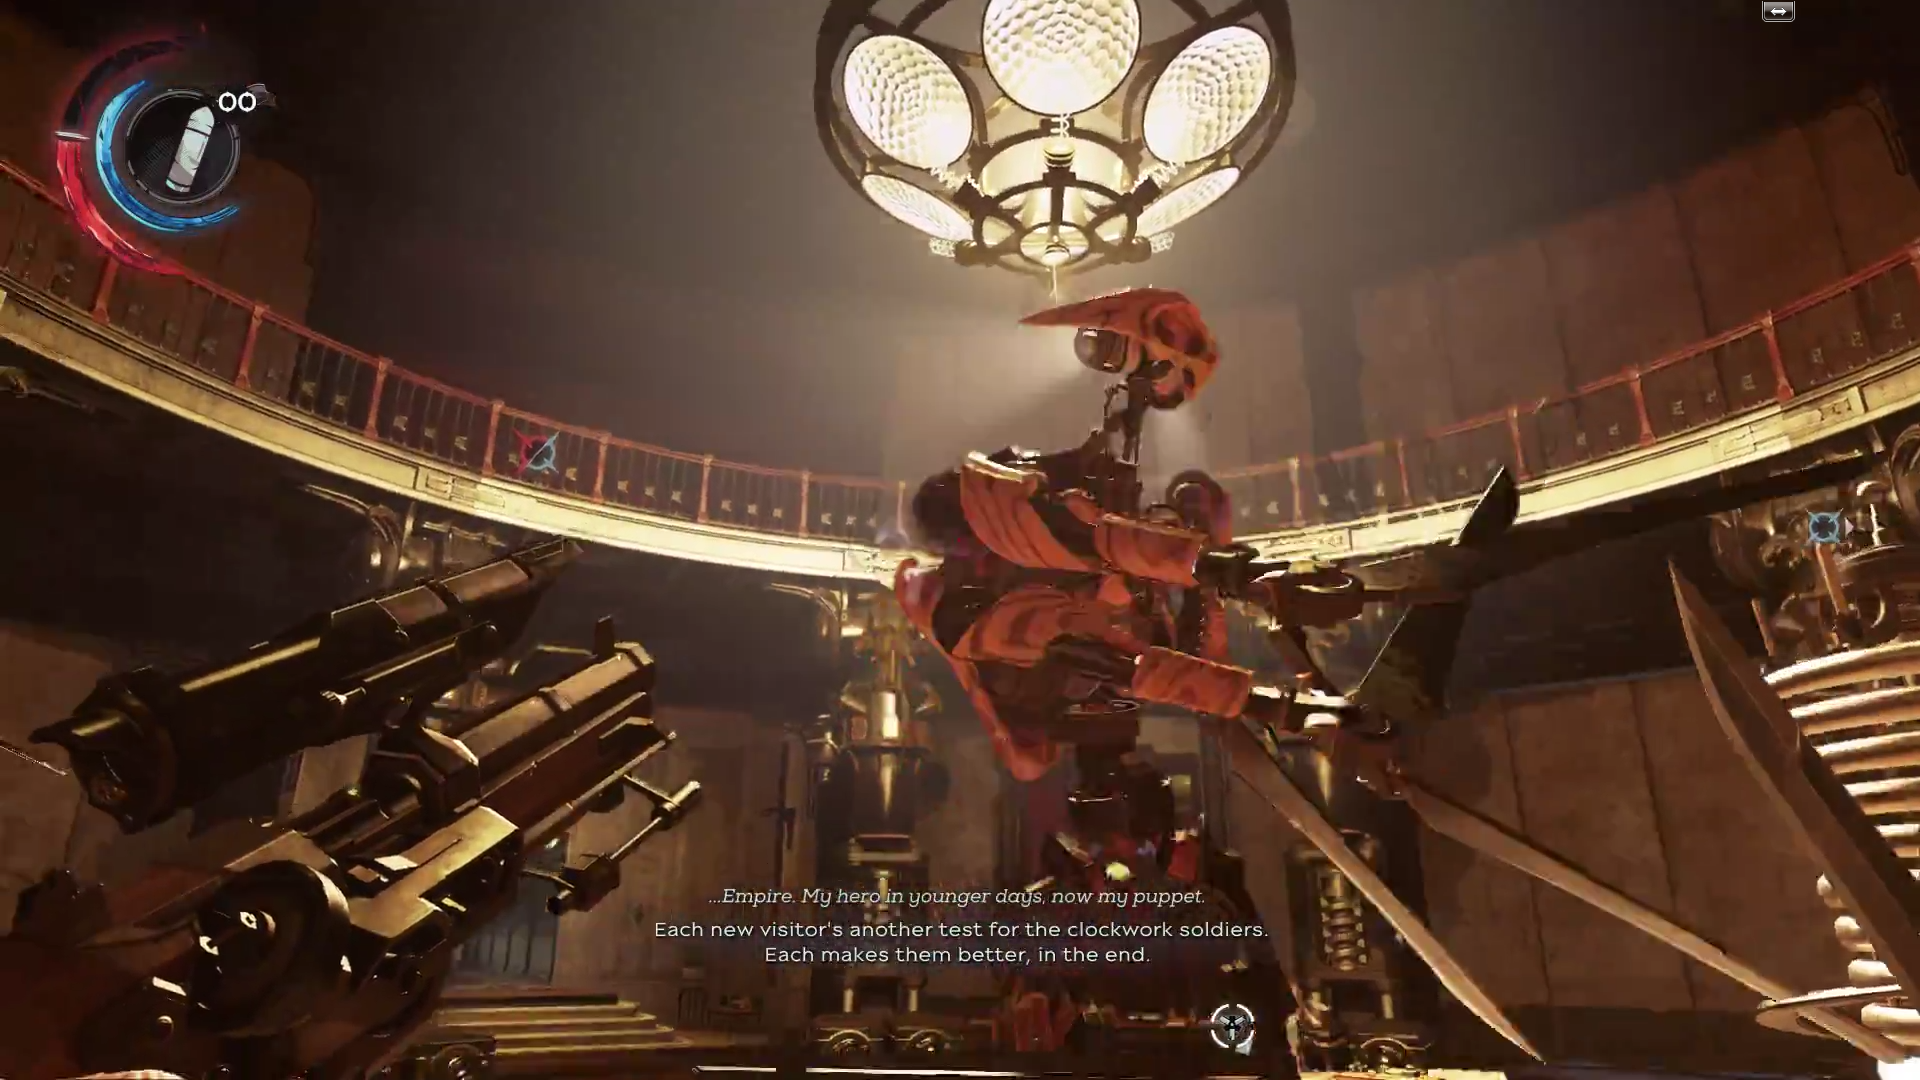 Hands-on with Dishonored 2, The Clockwork Mansion